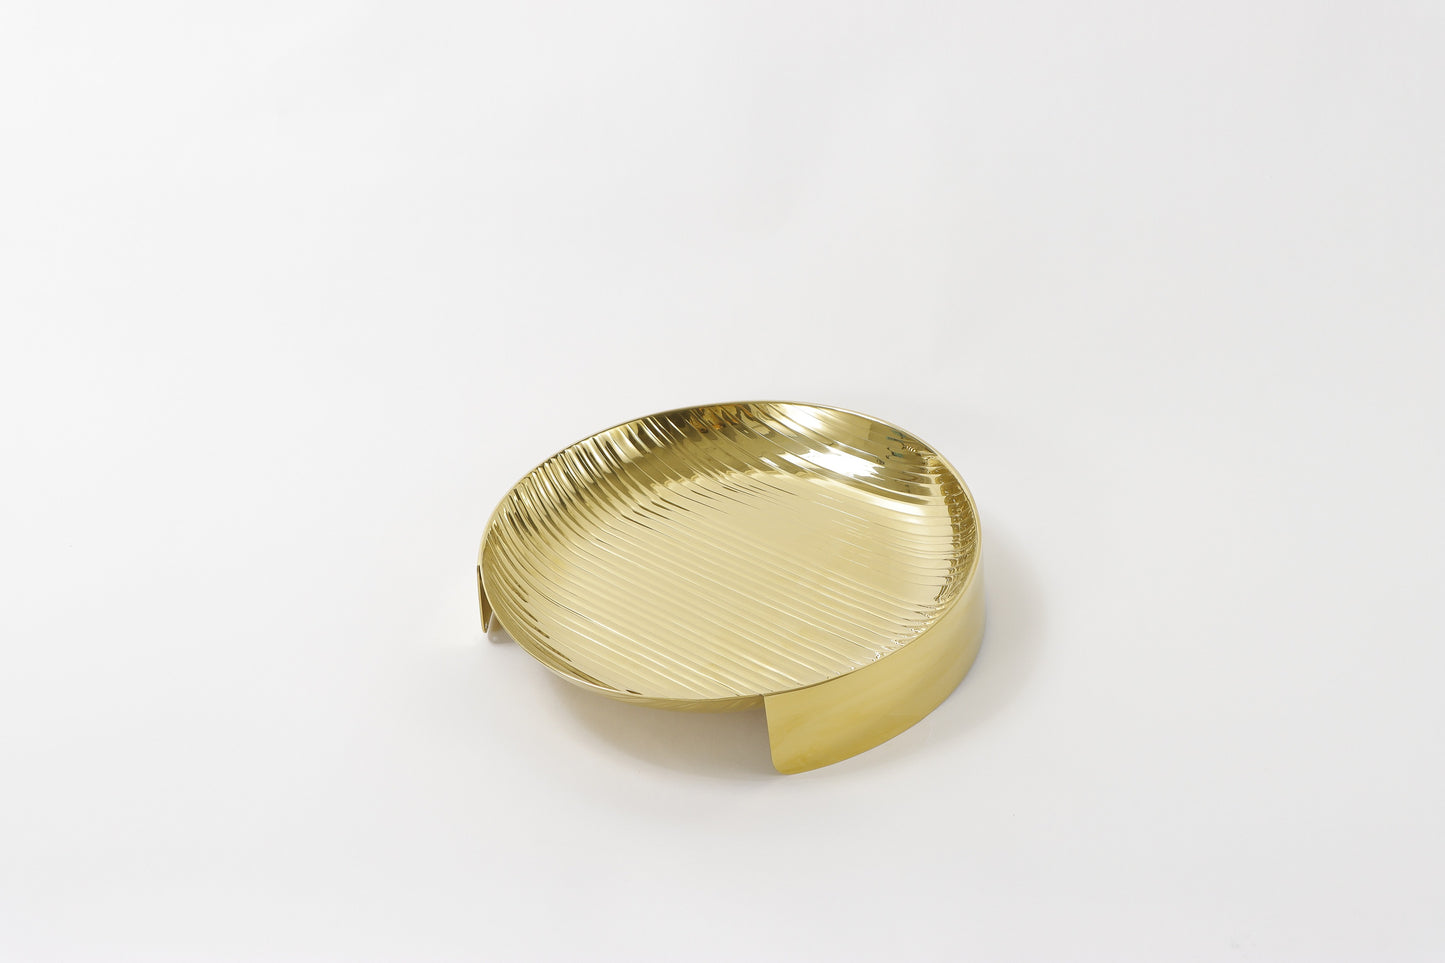 Gold S/S Steel Serving Tray